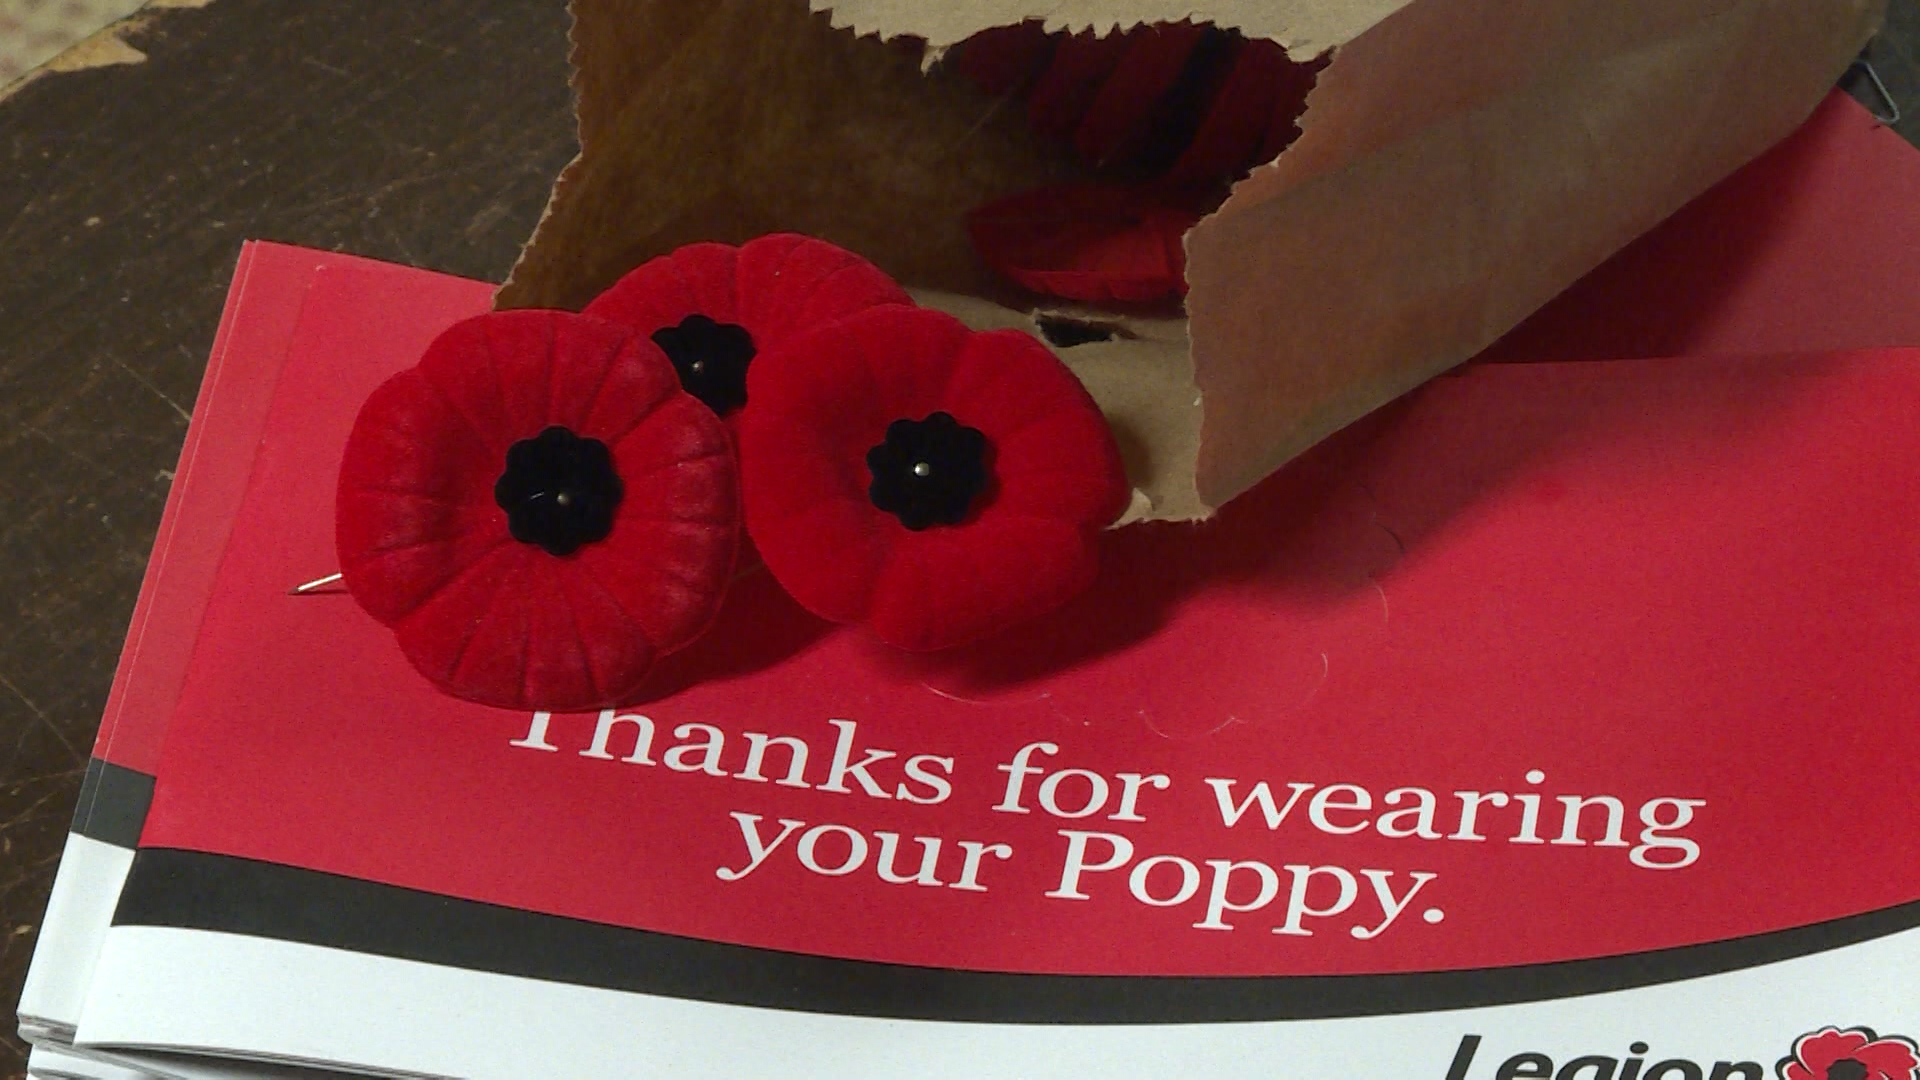 The Remembrance Poppy